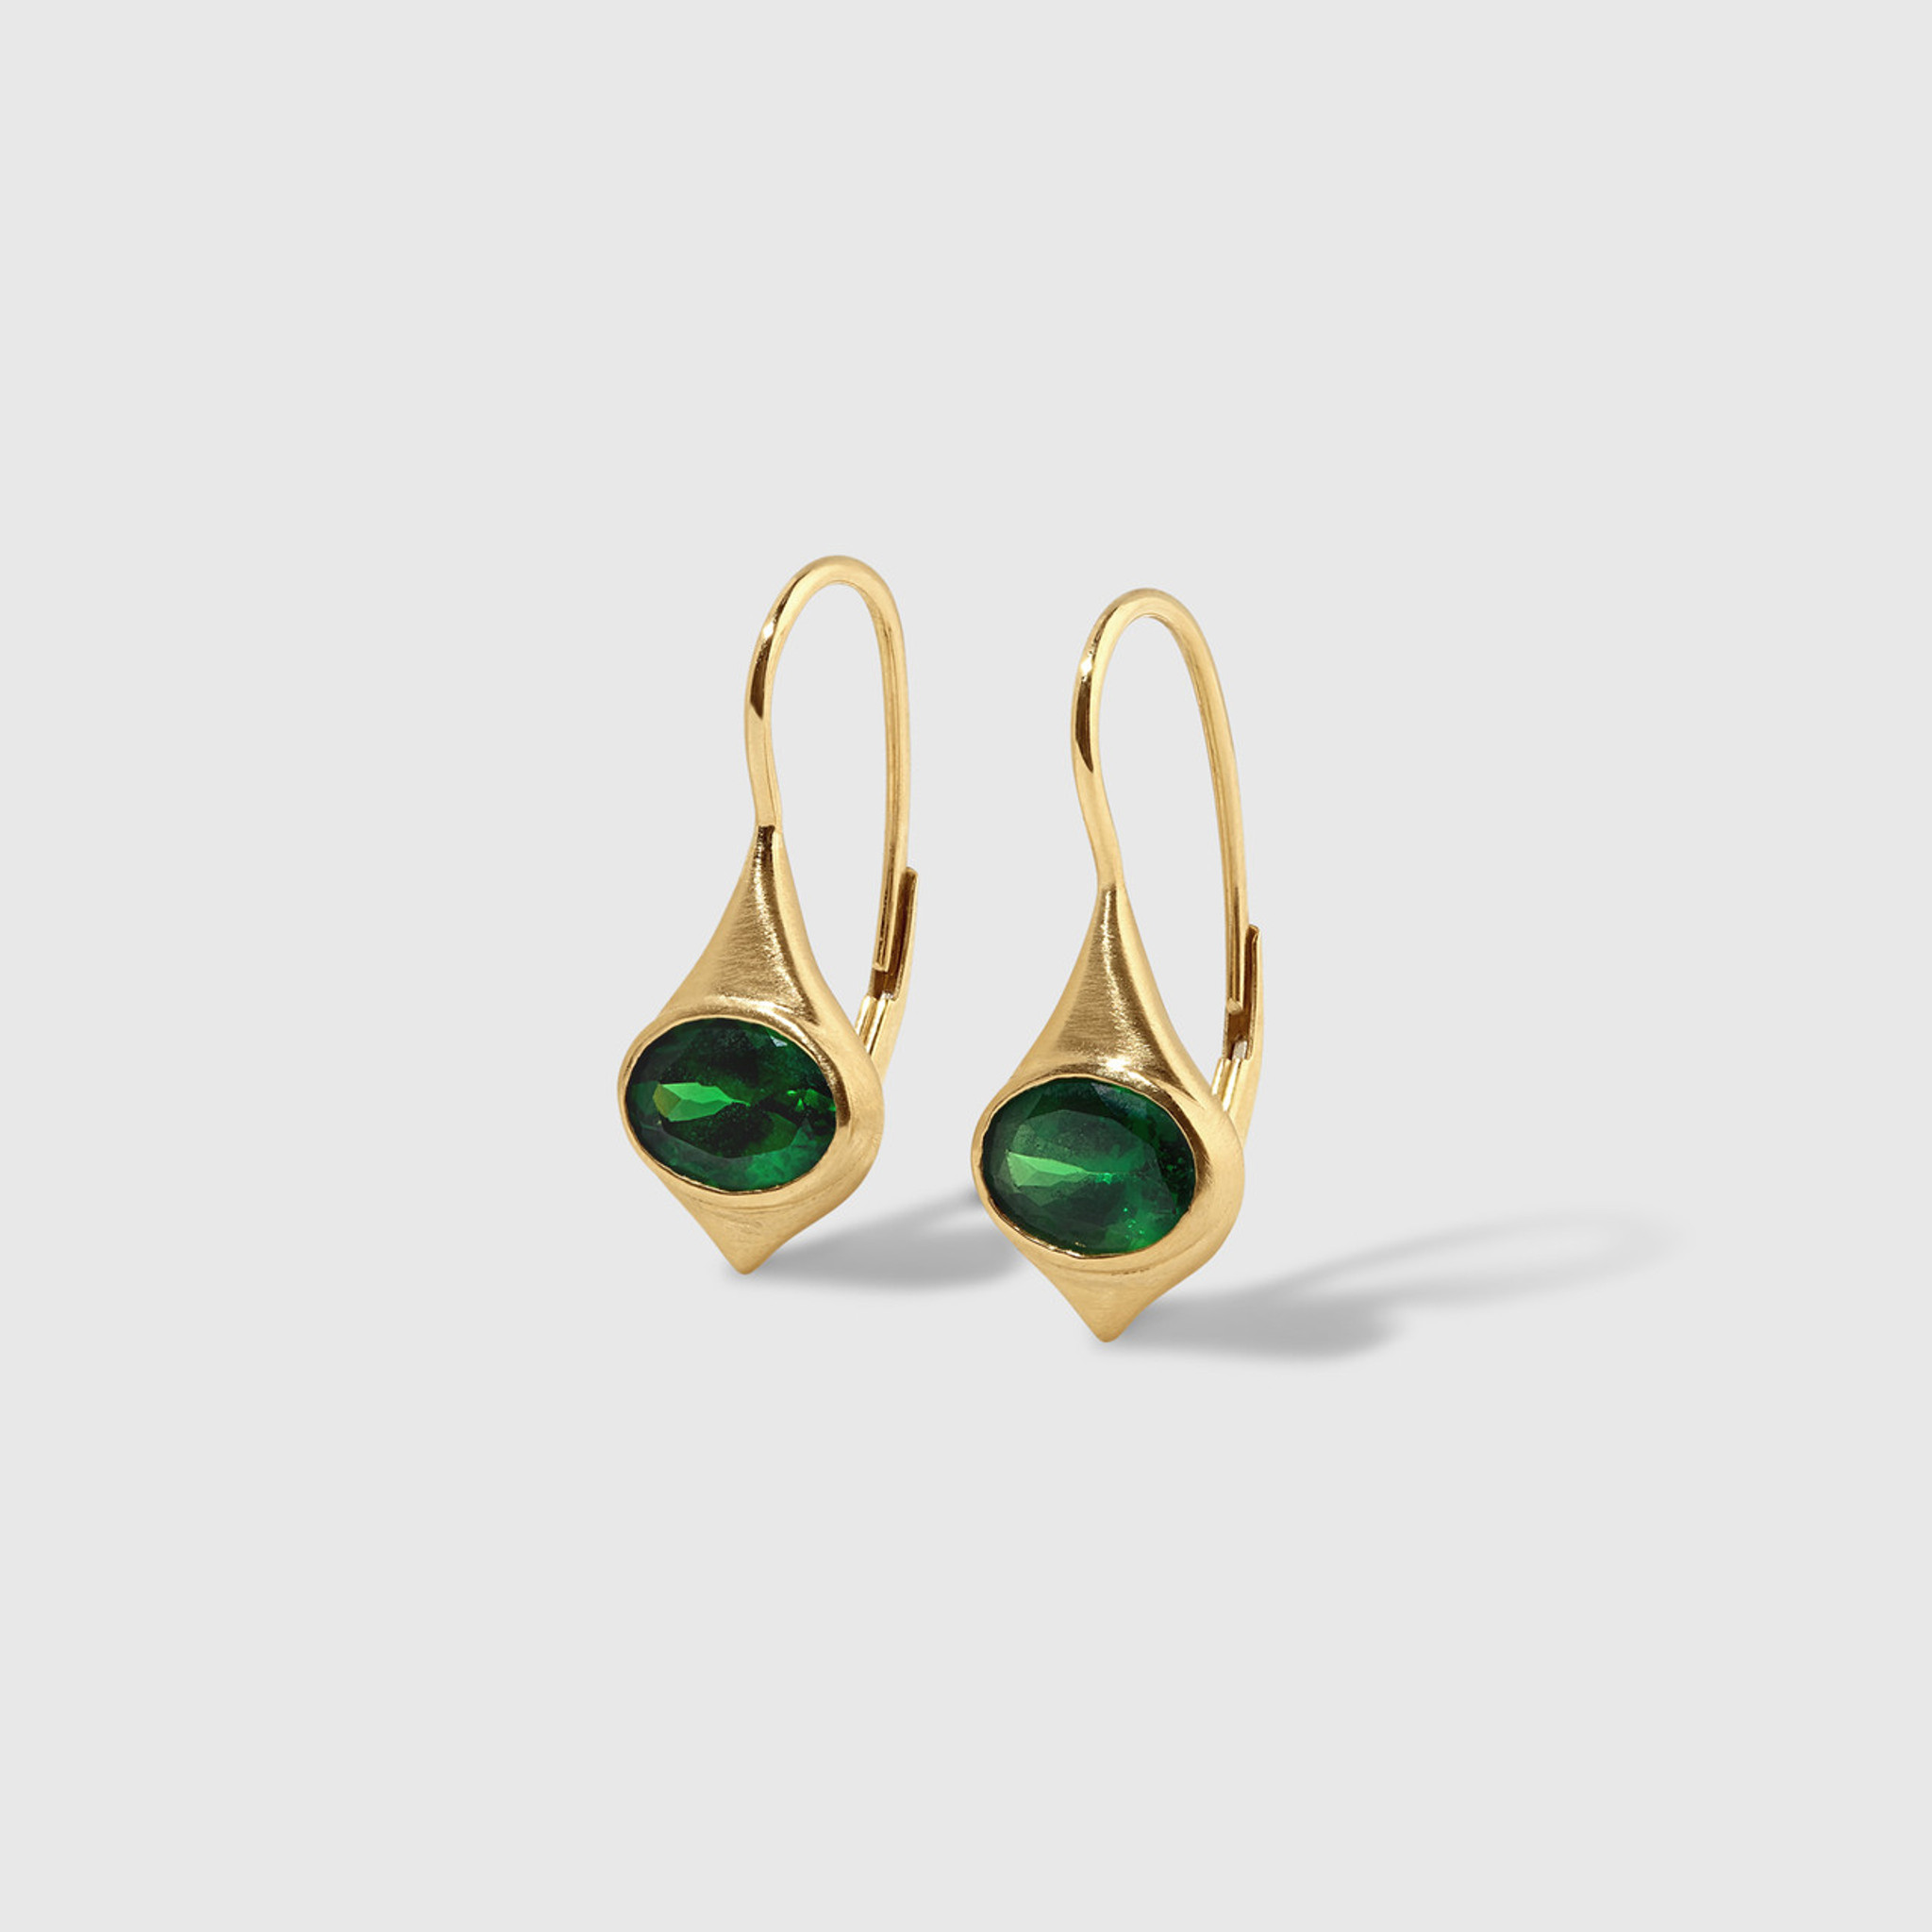 Ashley Childs Droplette Earrings with East-West Bright Green, Oval Tsavorites, 18kt Gold 